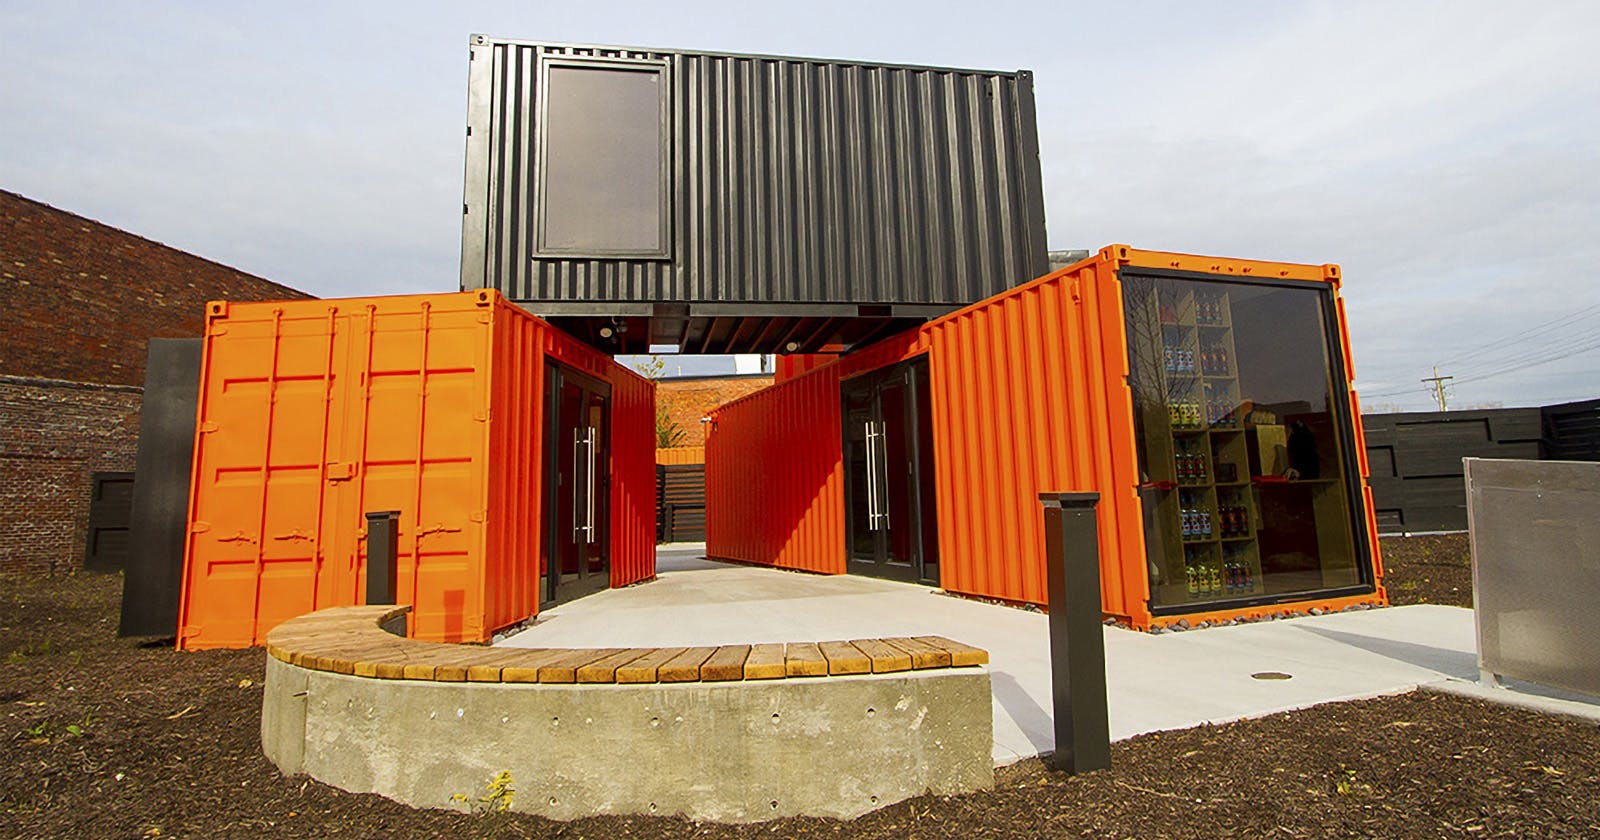 Containers as building blocks for development